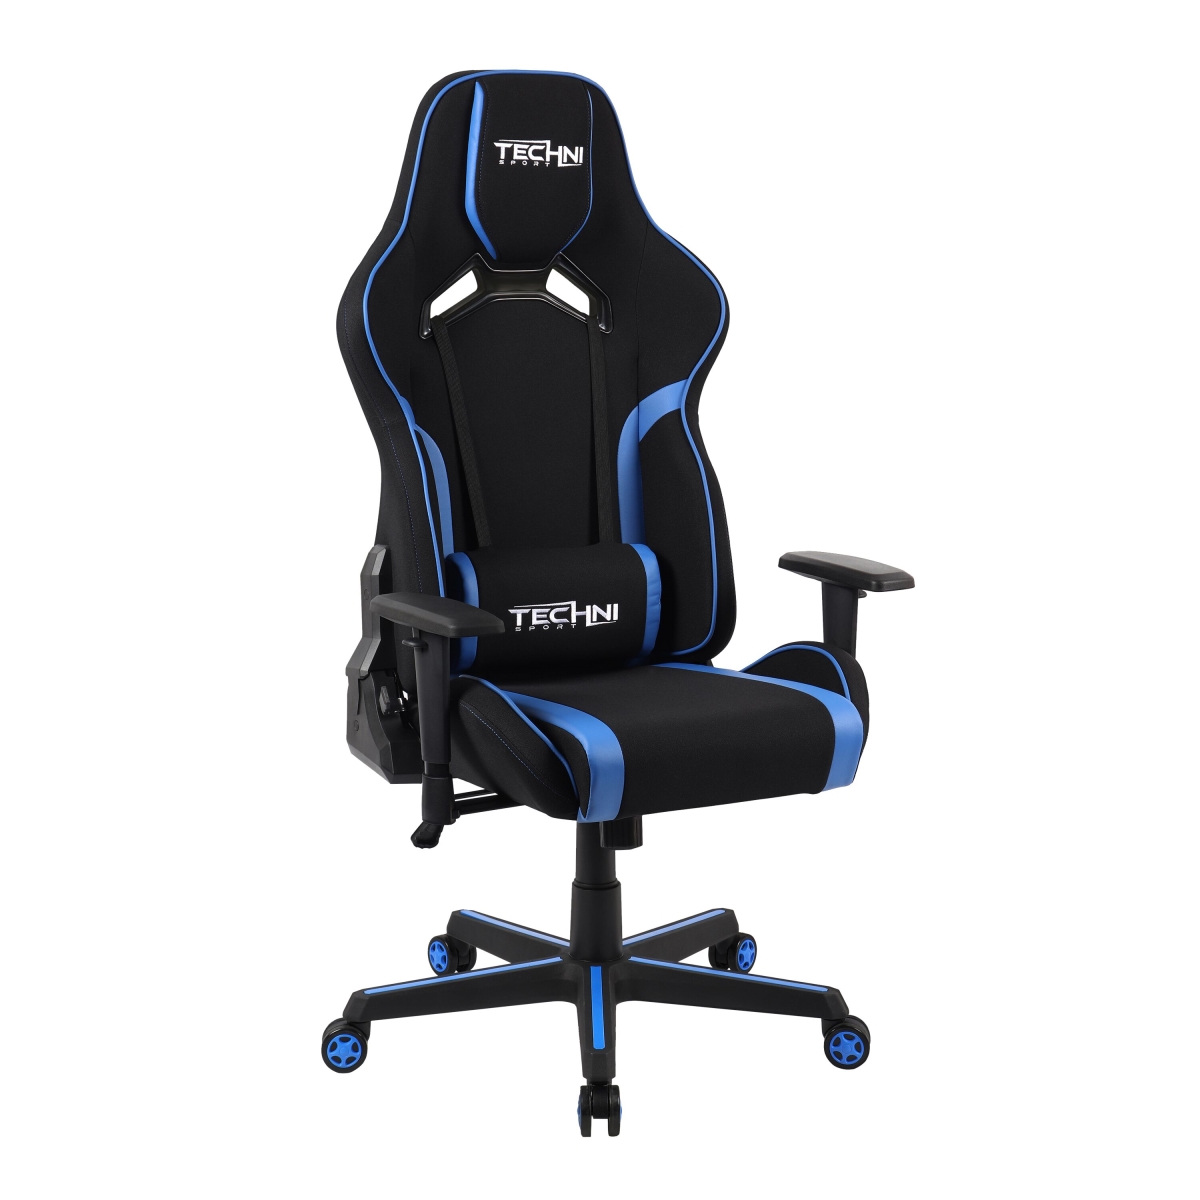 Rta-tsf71-bl Fabric Office-pc Gaming Chair, Blue